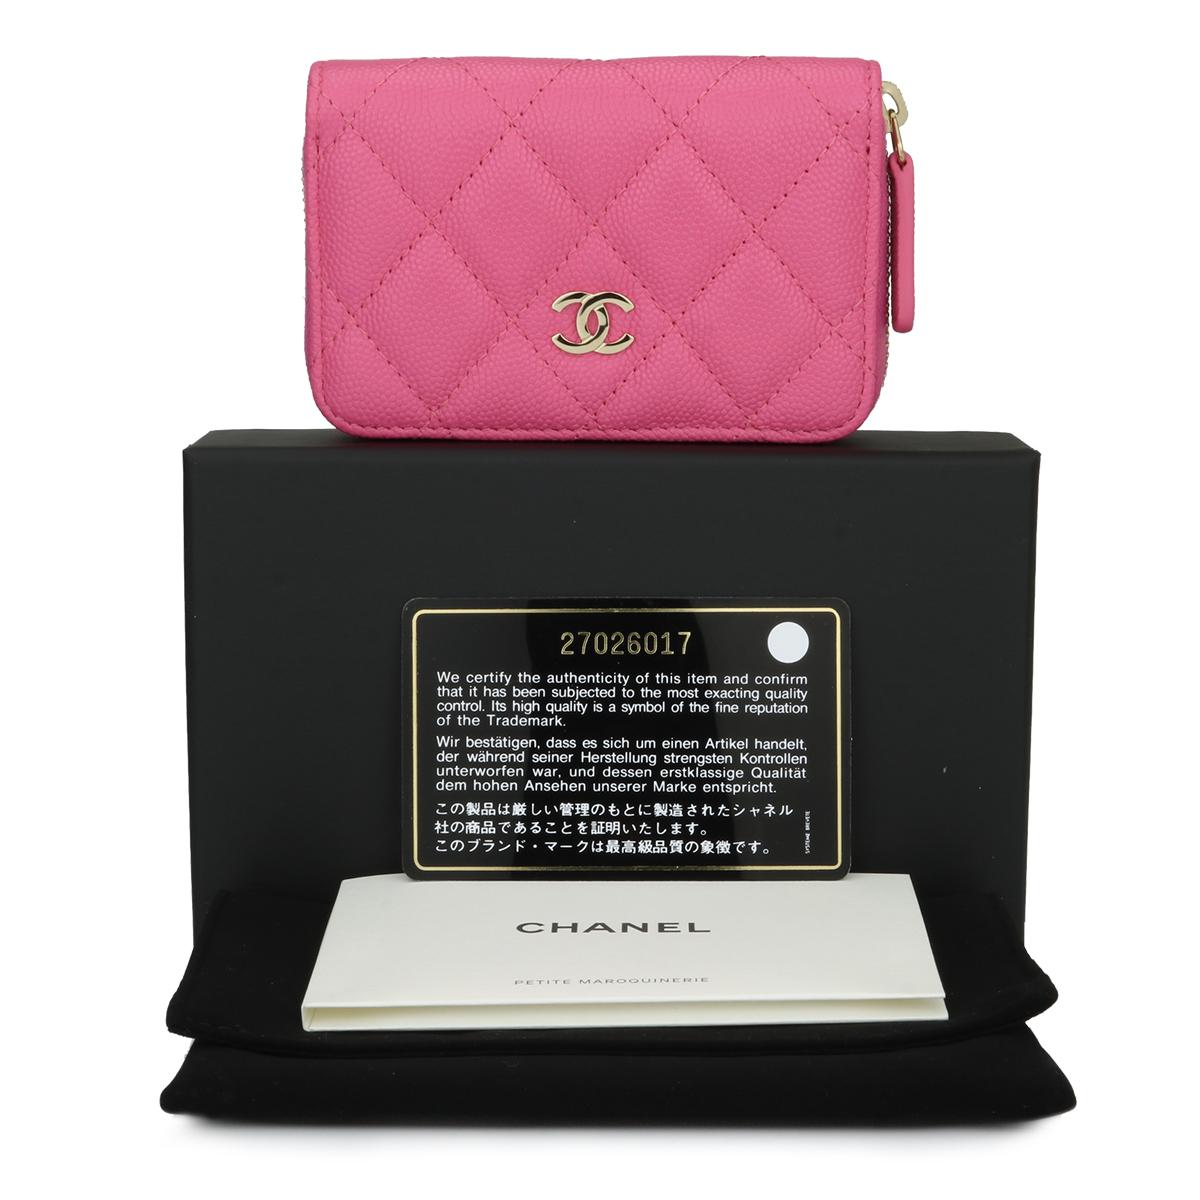 Authentic CHANEL Classic Coin Purse/ Small Zip Wallet Pink Caviar with Light Gold Hardware 2018.

This stunning zippy wallet is in a brand new condition, the wallet still holds its original shape, and the hardware is still very shiny.

Exterior